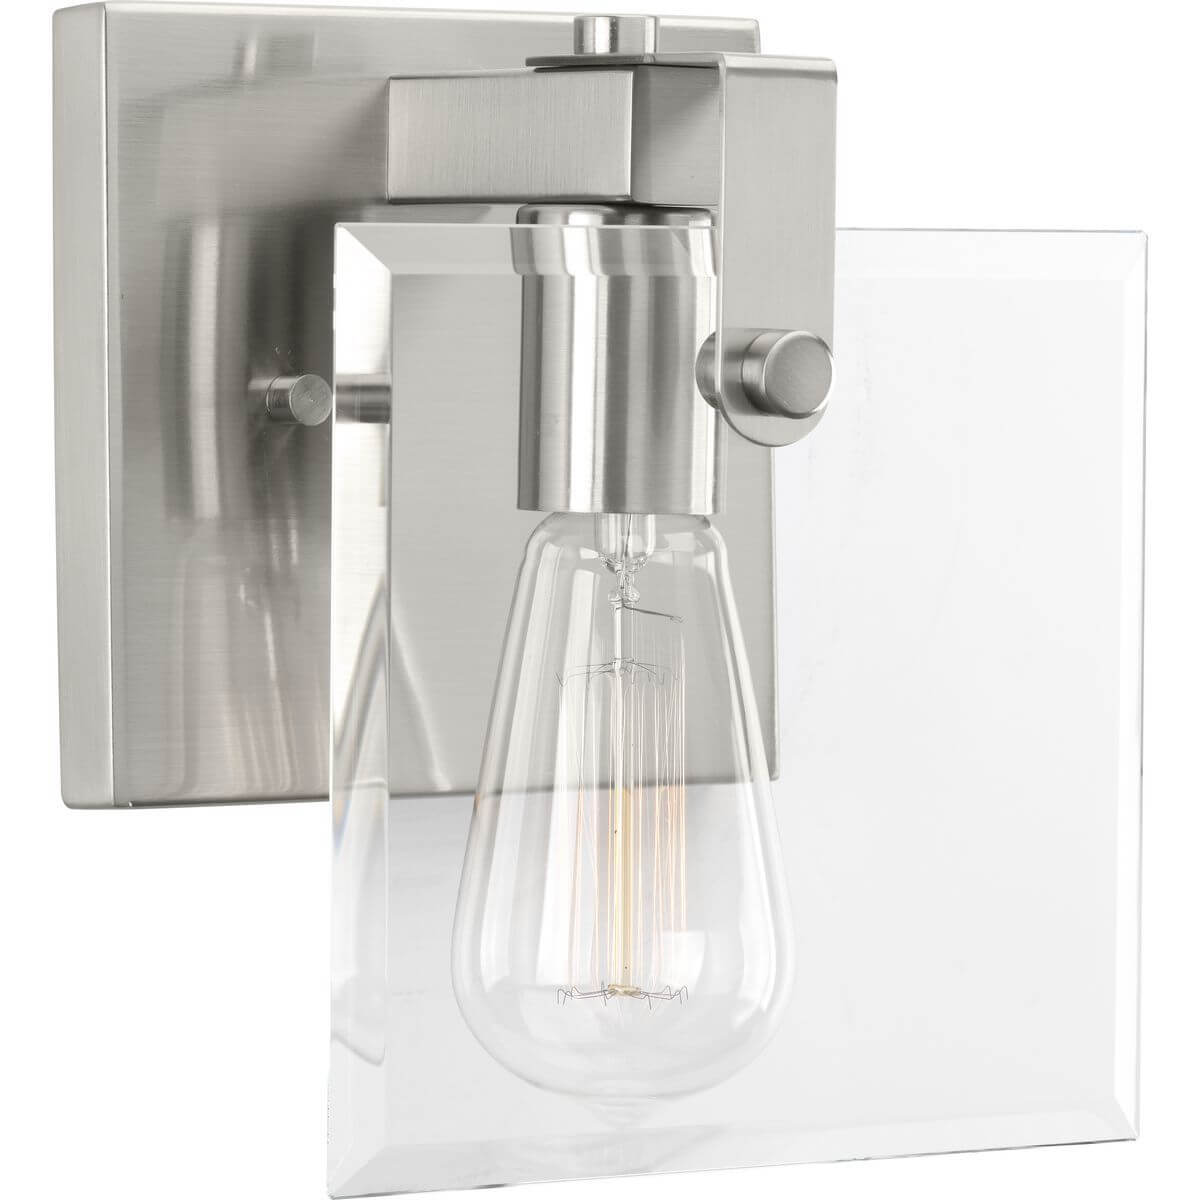 Progress Lighting Glayse 1 Light 7 inch Bath Vanity Light in Brushed Nickel with Clear Glass P300105-009